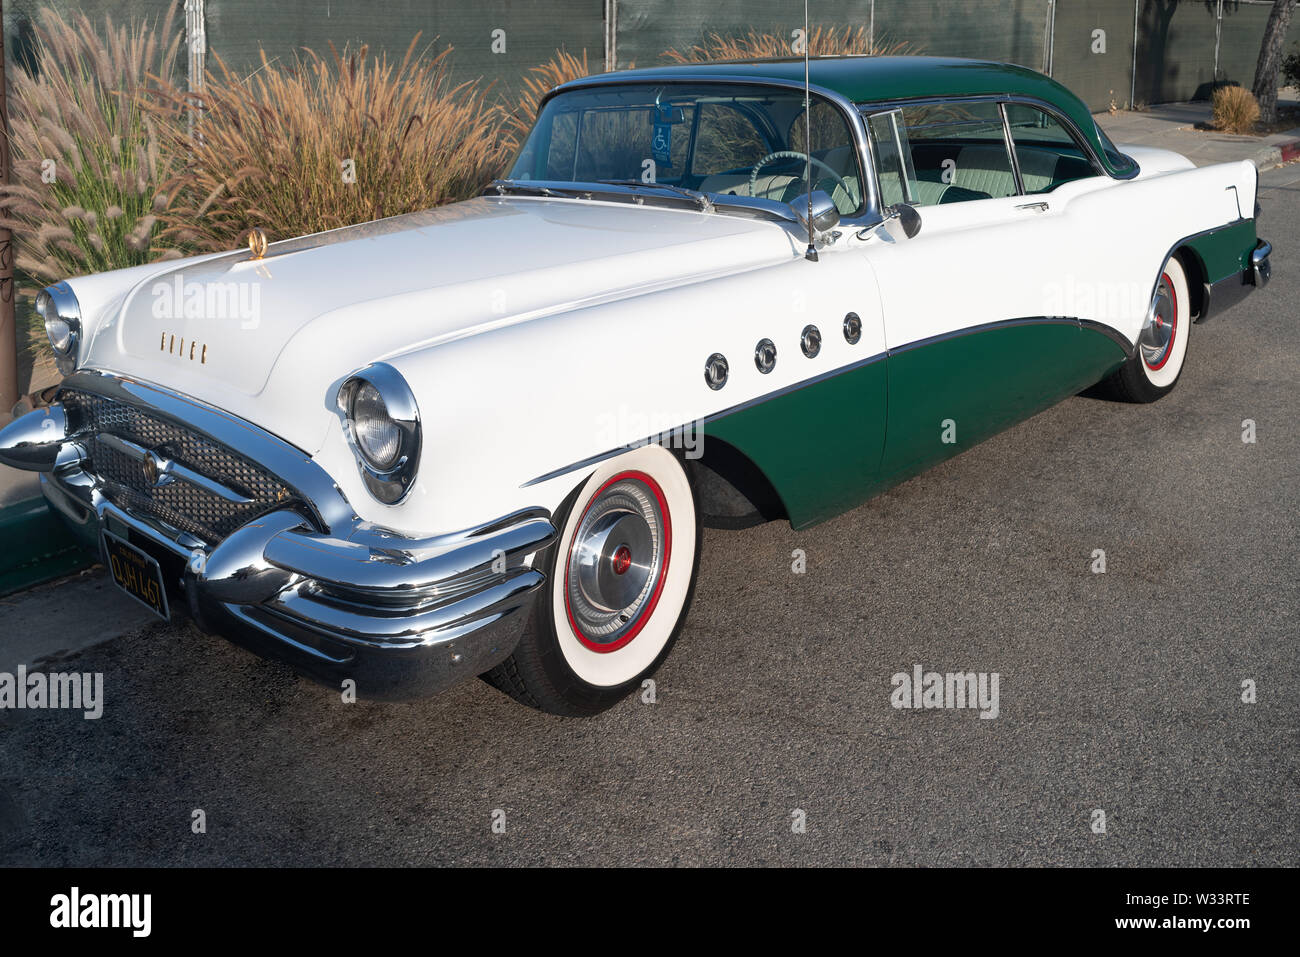 Image of a ca. 1955 Buick Roadmaster shown parked on October 13, 2016 in Pasadena. Stock Photo